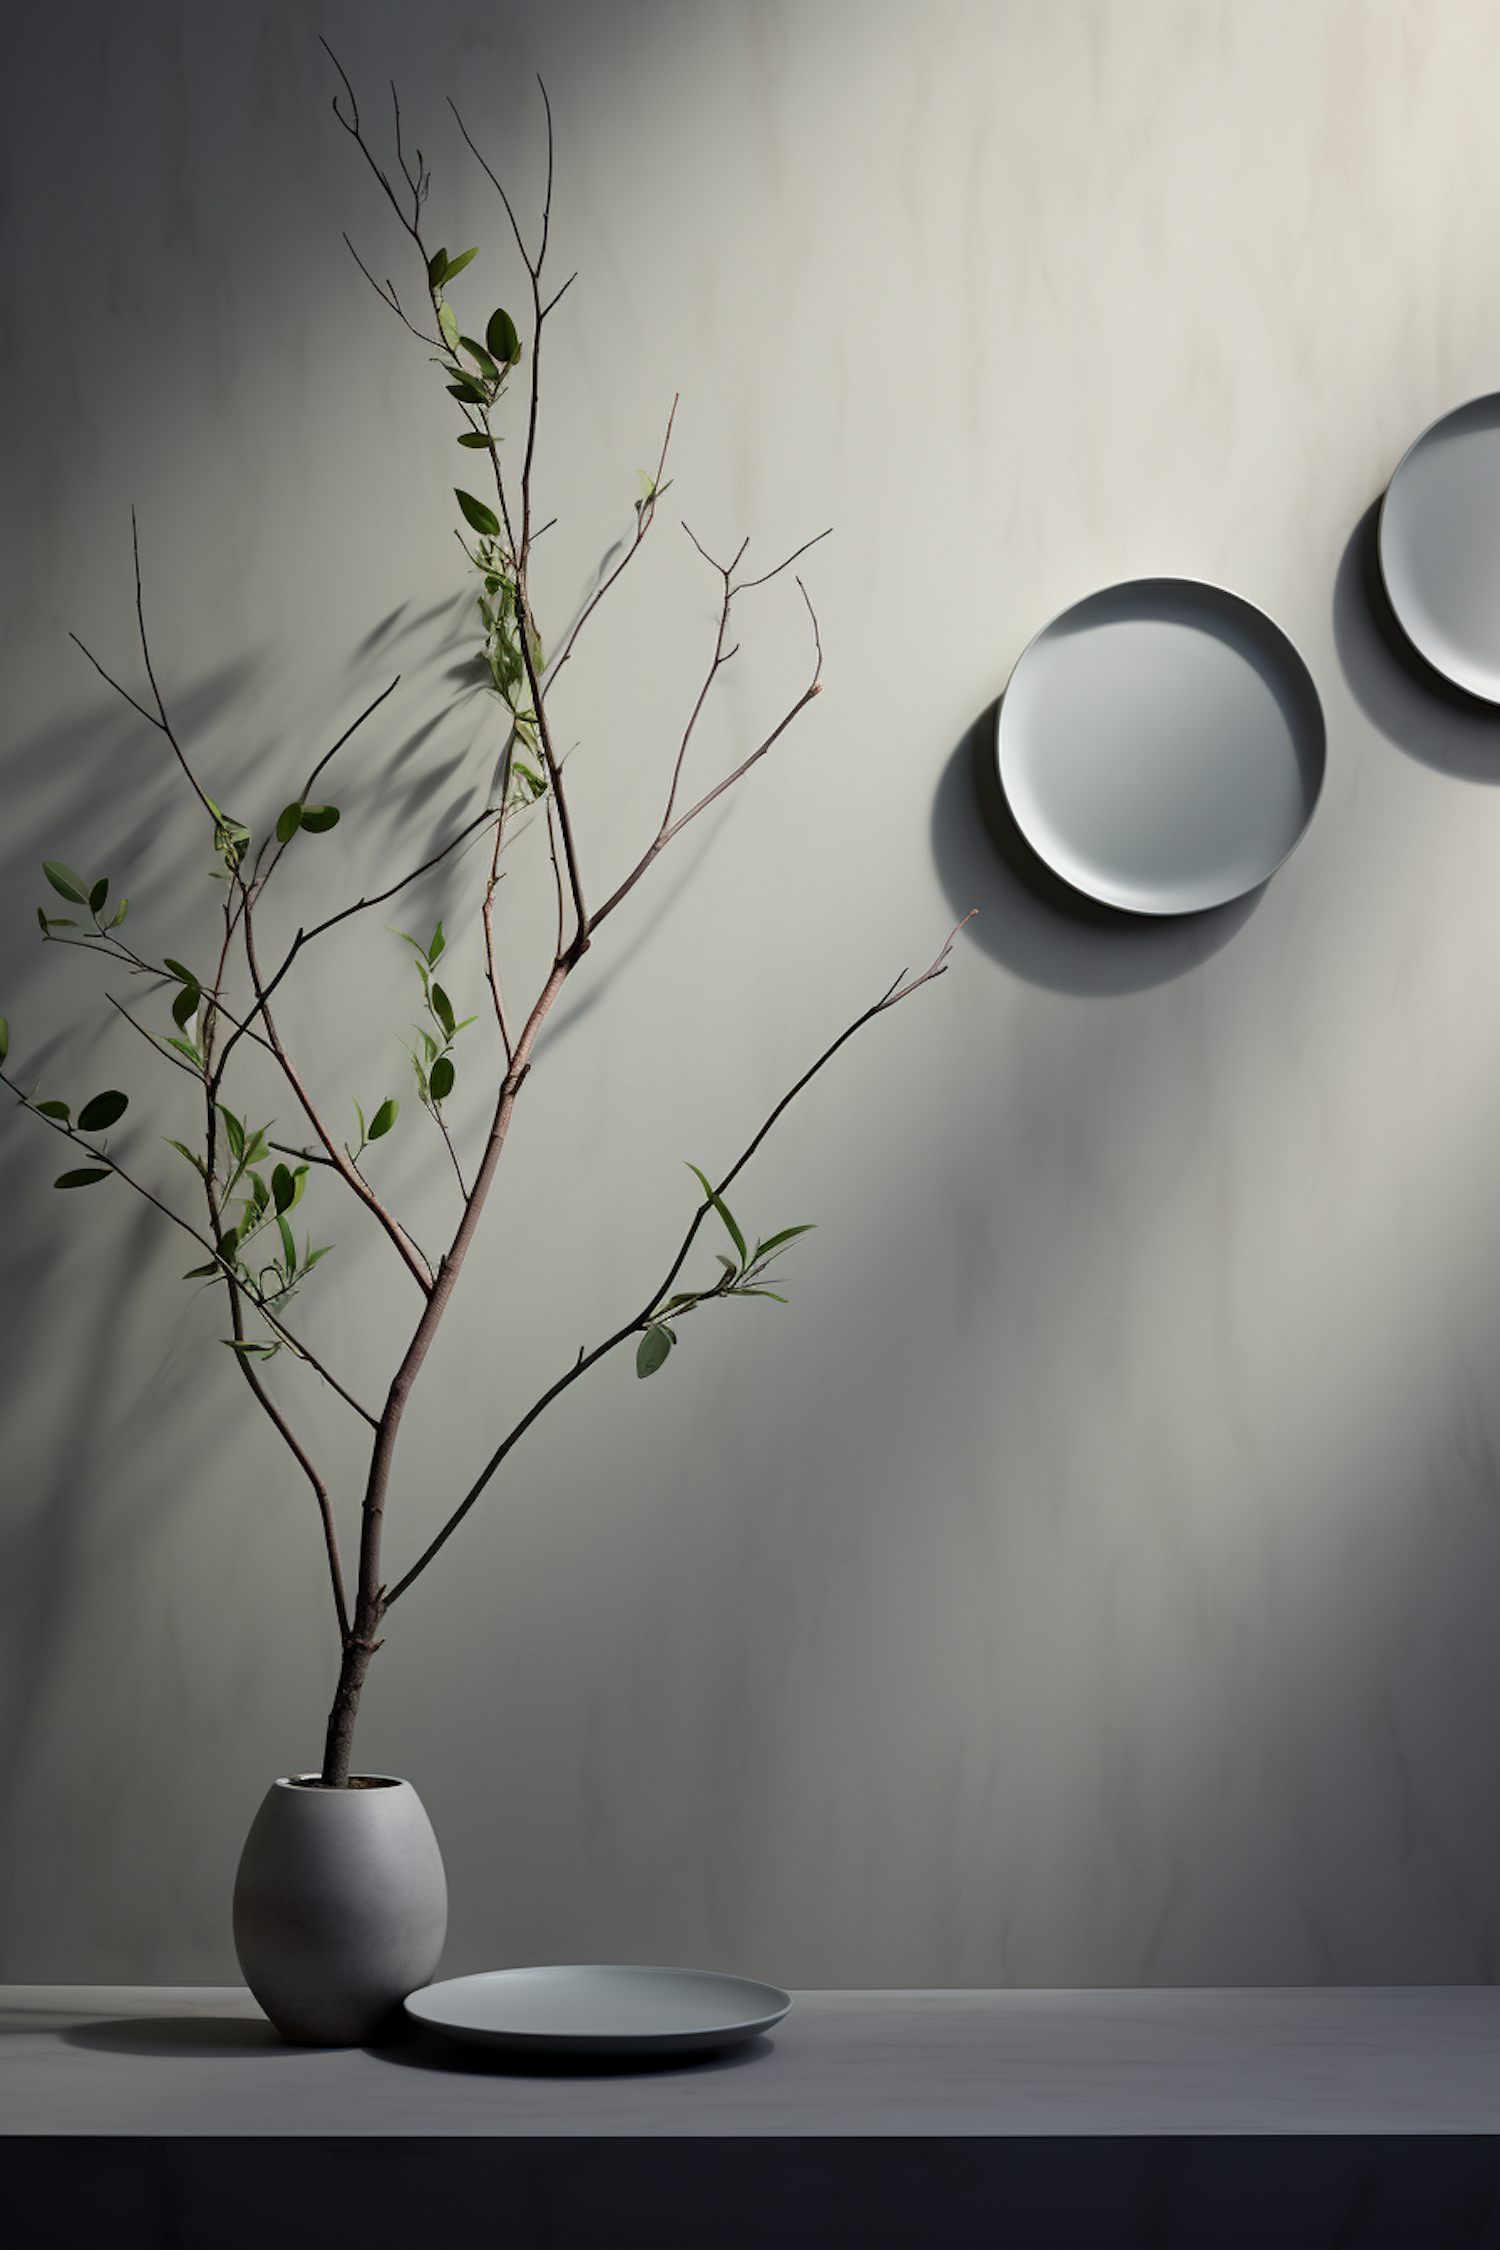 Minimalist Elegance with Leafy Branch and Spherical Vase